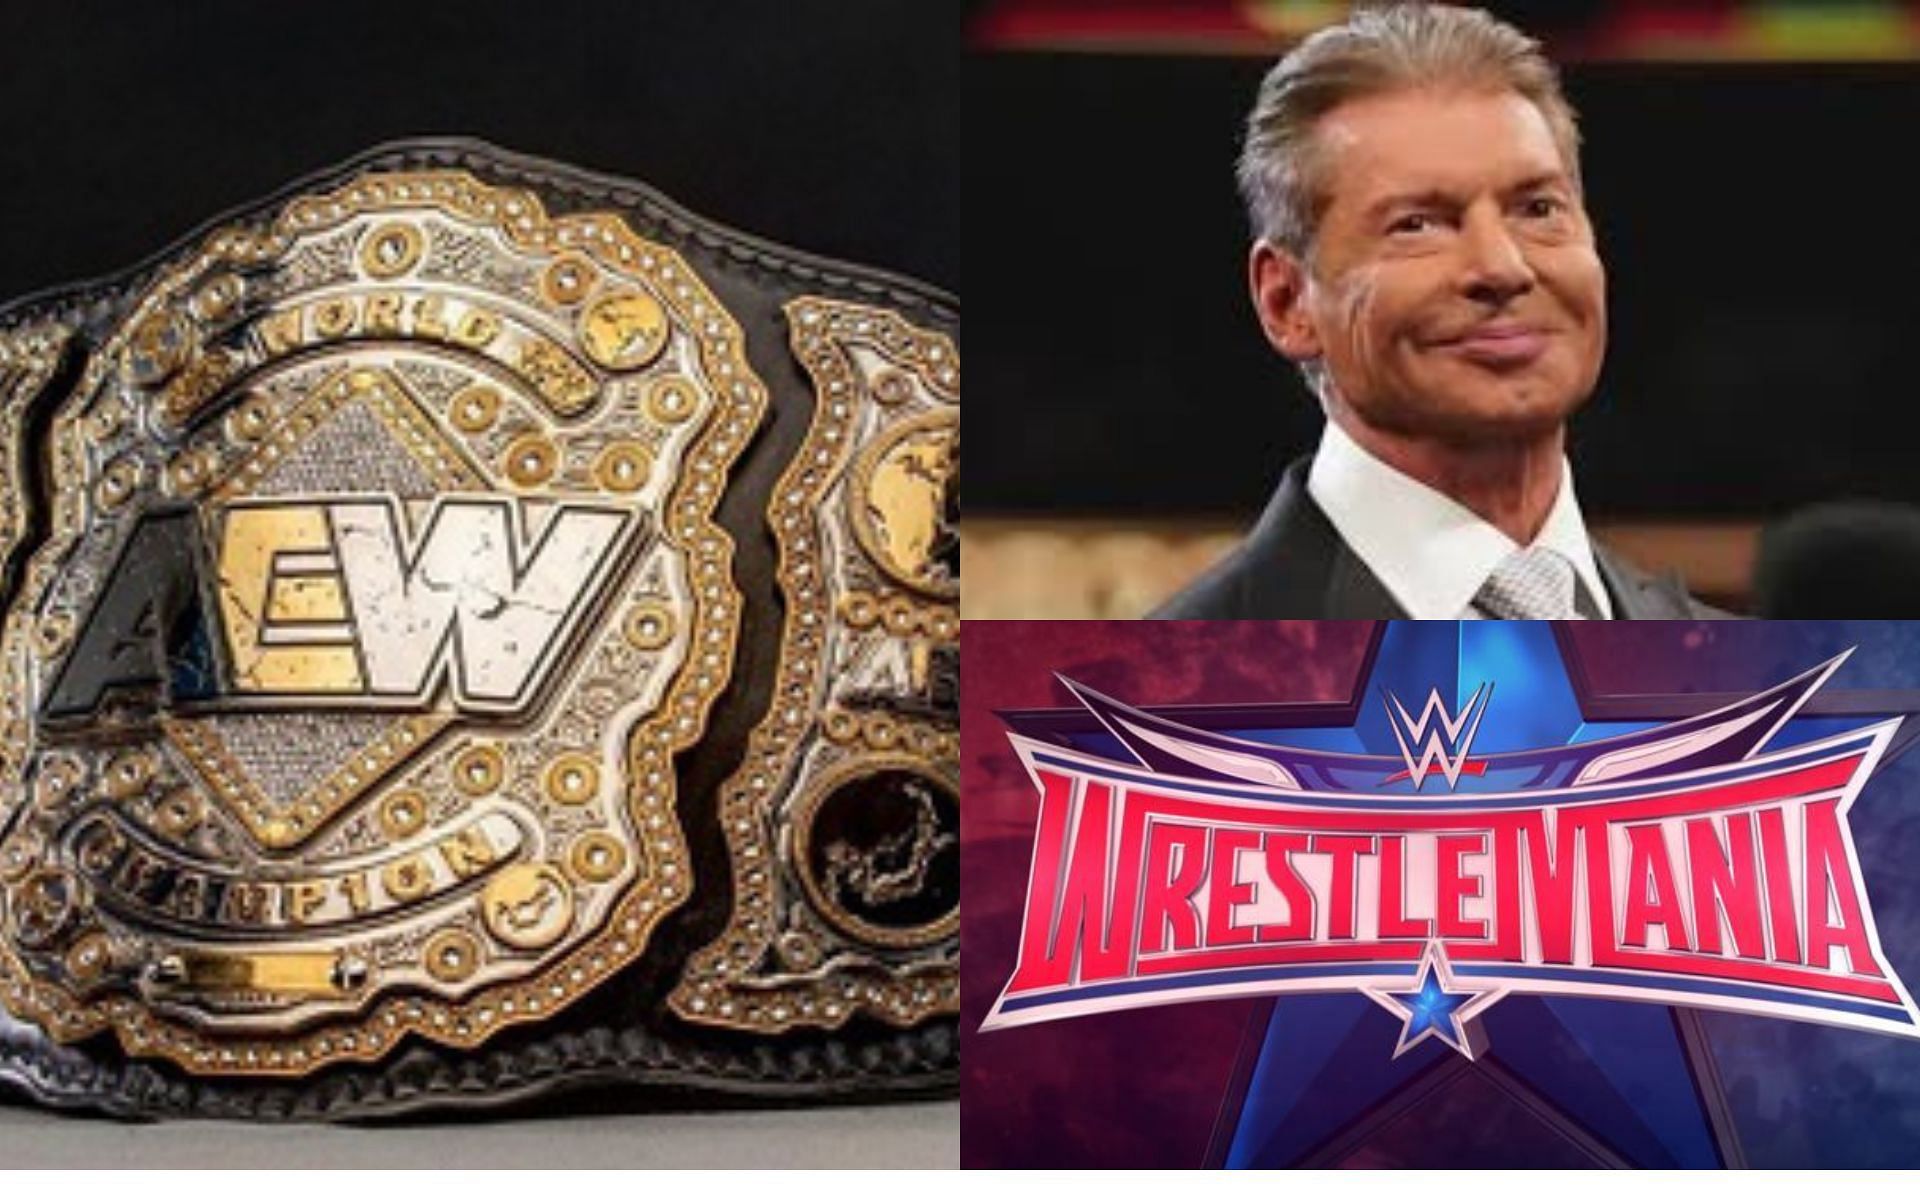 Vince McMahon stepped down as CEO and Chairman of WWE in July this year